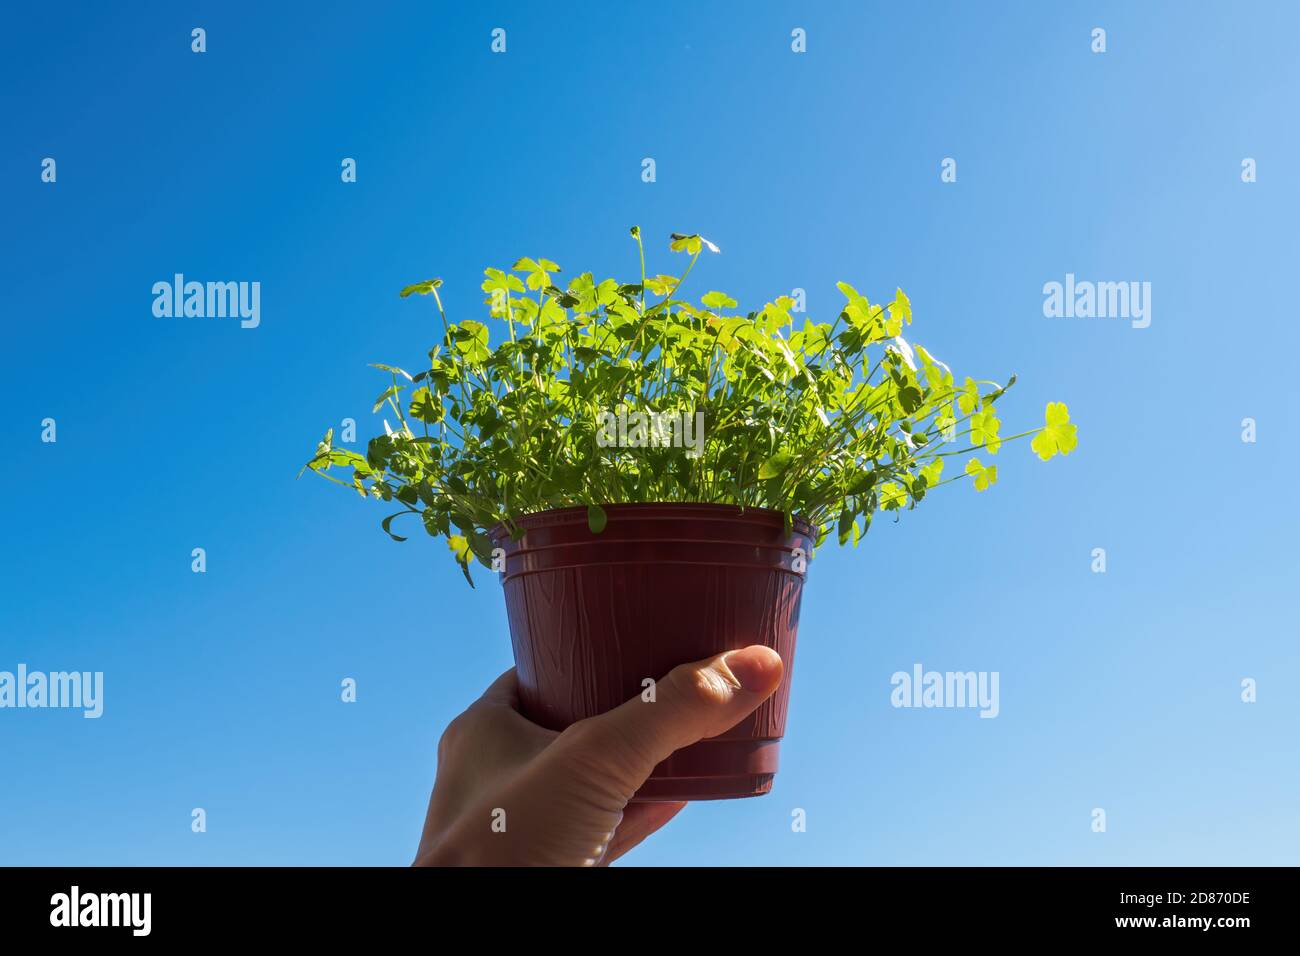 A hand holds a parsley seedling in a brown pot against a blue sky. Copy space, selective focus. Stock Photo